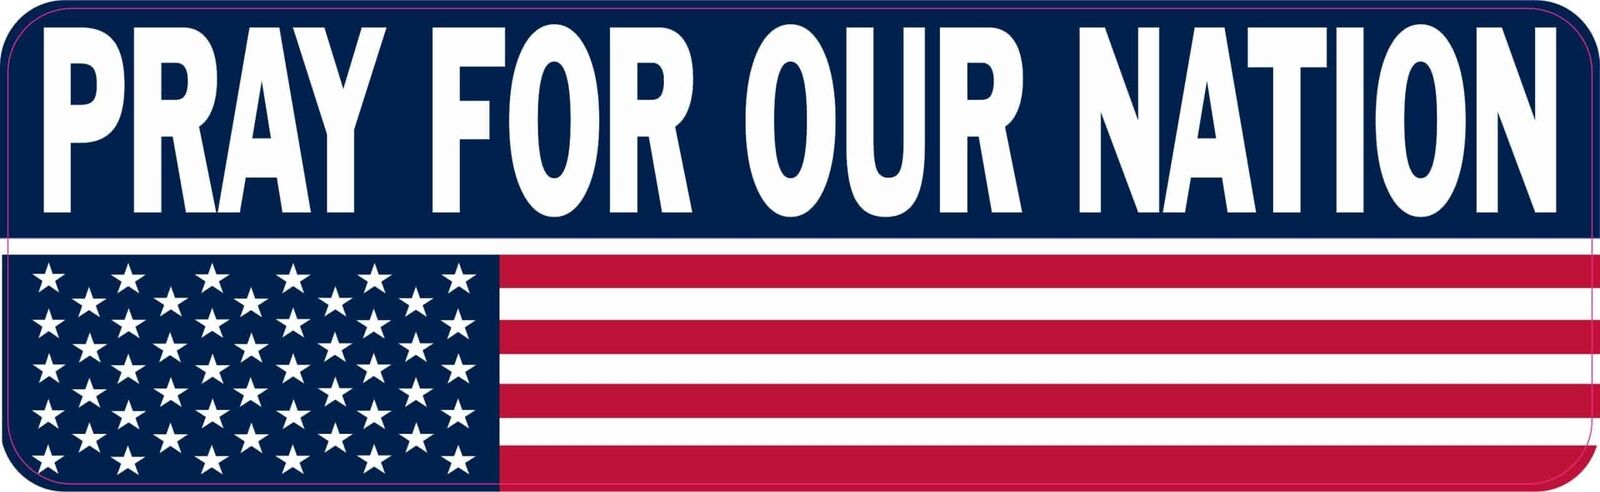 StickerTalk Pray For Our Nation US Flag Vinyl Sticker, 10 inches x 3 inches